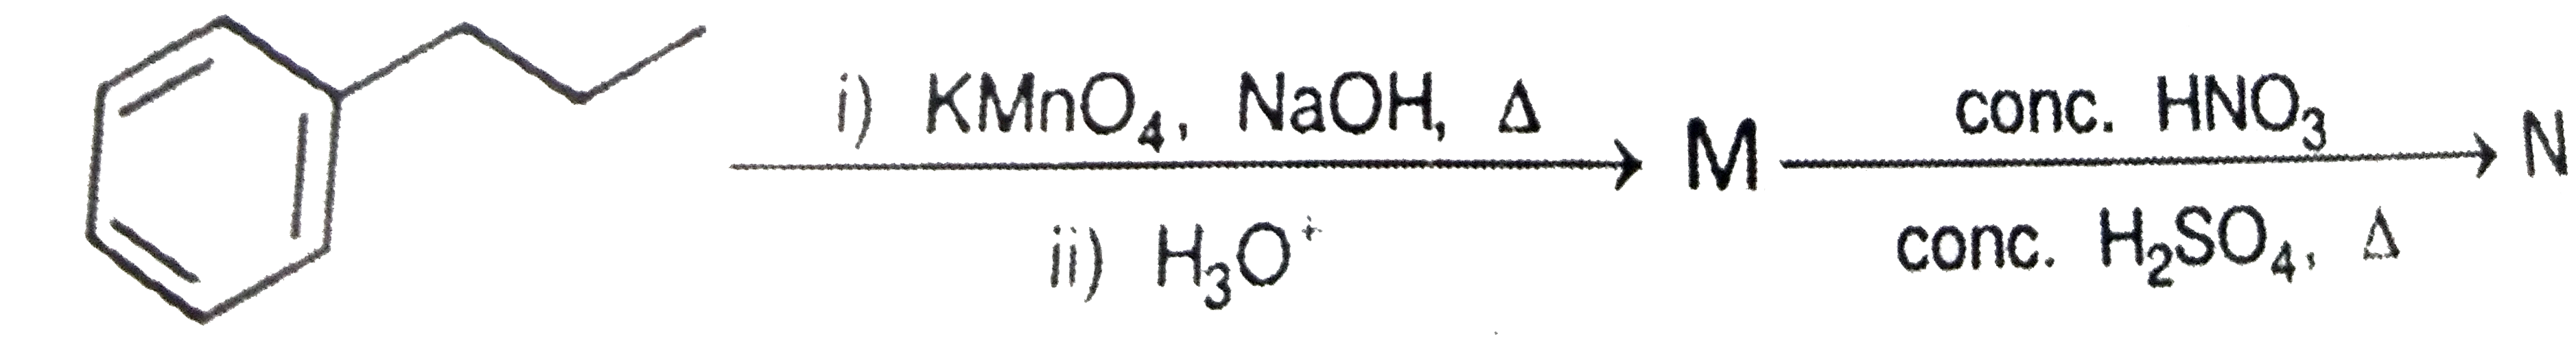 The product 'N' of the following reaction is